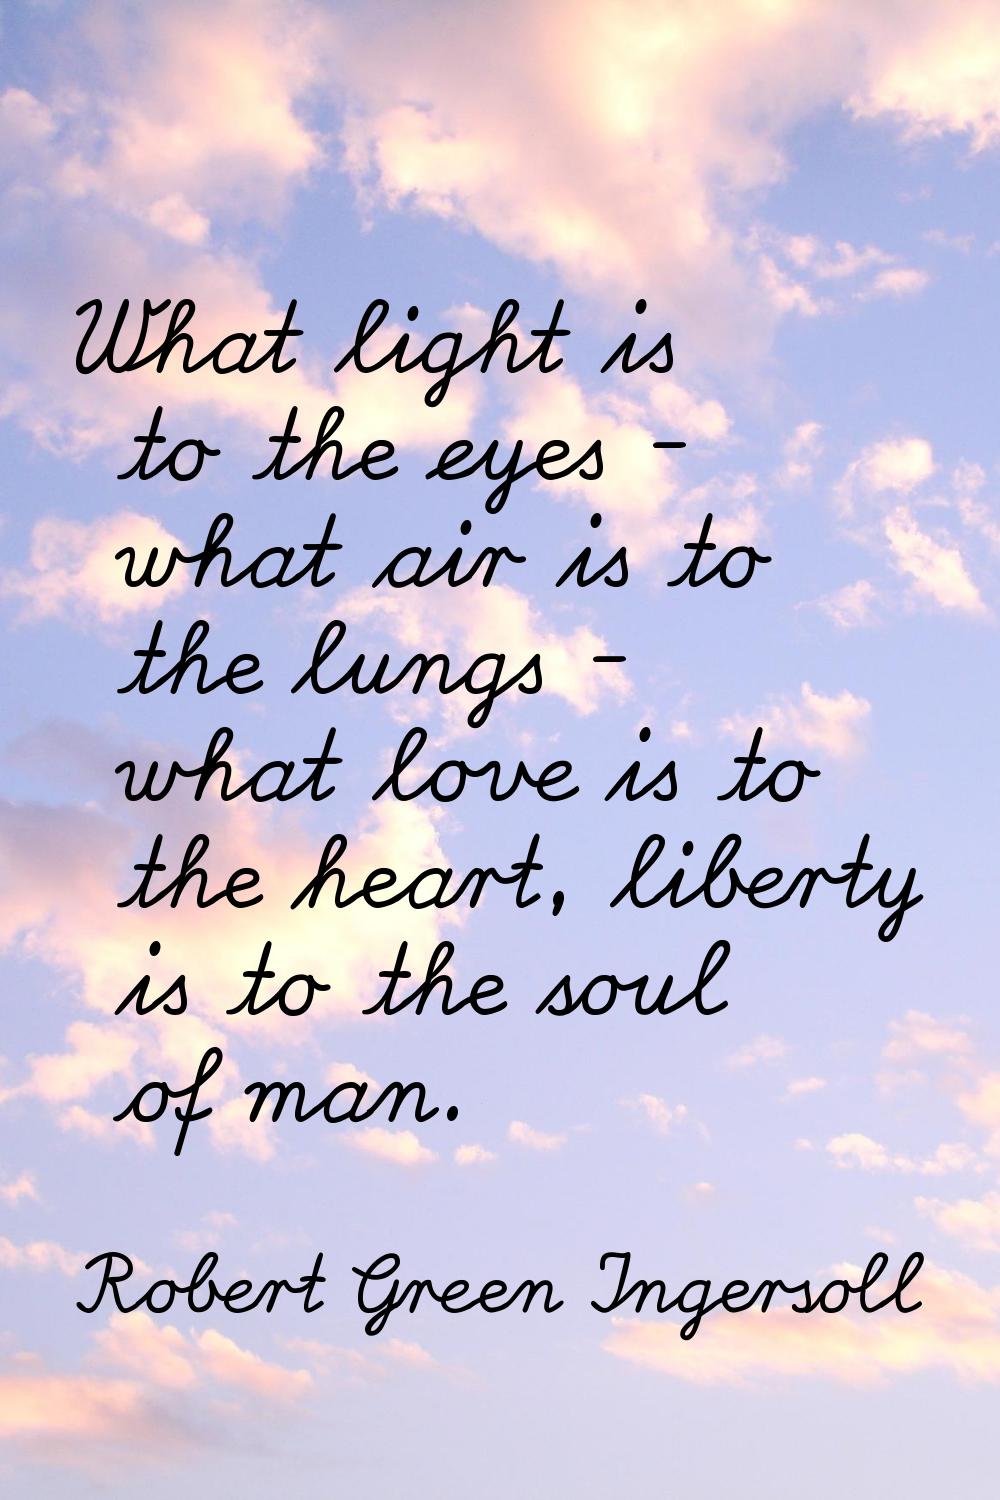 What light is to the eyes - what air is to the lungs - what love is to the heart, liberty is to the